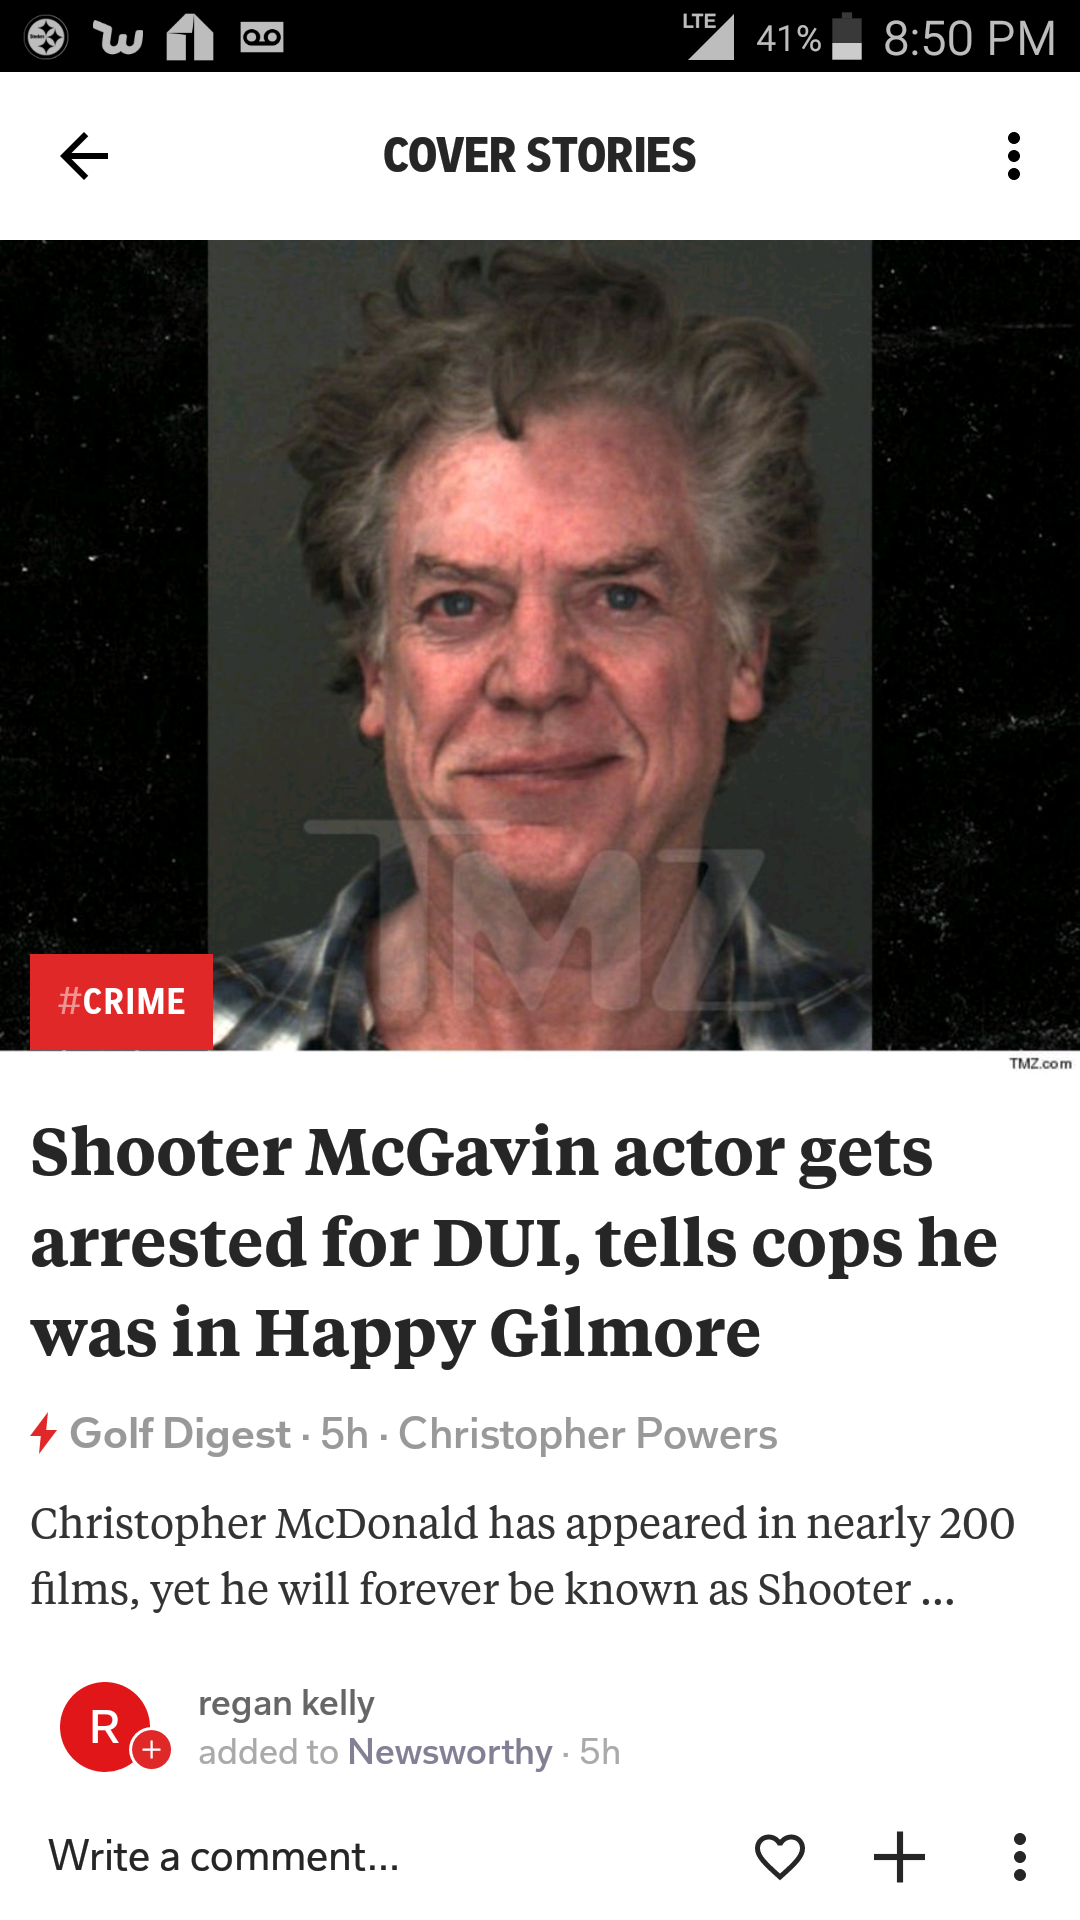 christopher mcdonald mugshot - Wa 12 41%. Cover Stories Shooter McGavin actor gets arrested for Dui, tells cops he was in Happy Gilmore Golf Digest 5h. Christopher Powers Christopher McDonald has appeared in nearly 200 films, yet he will forever be known 